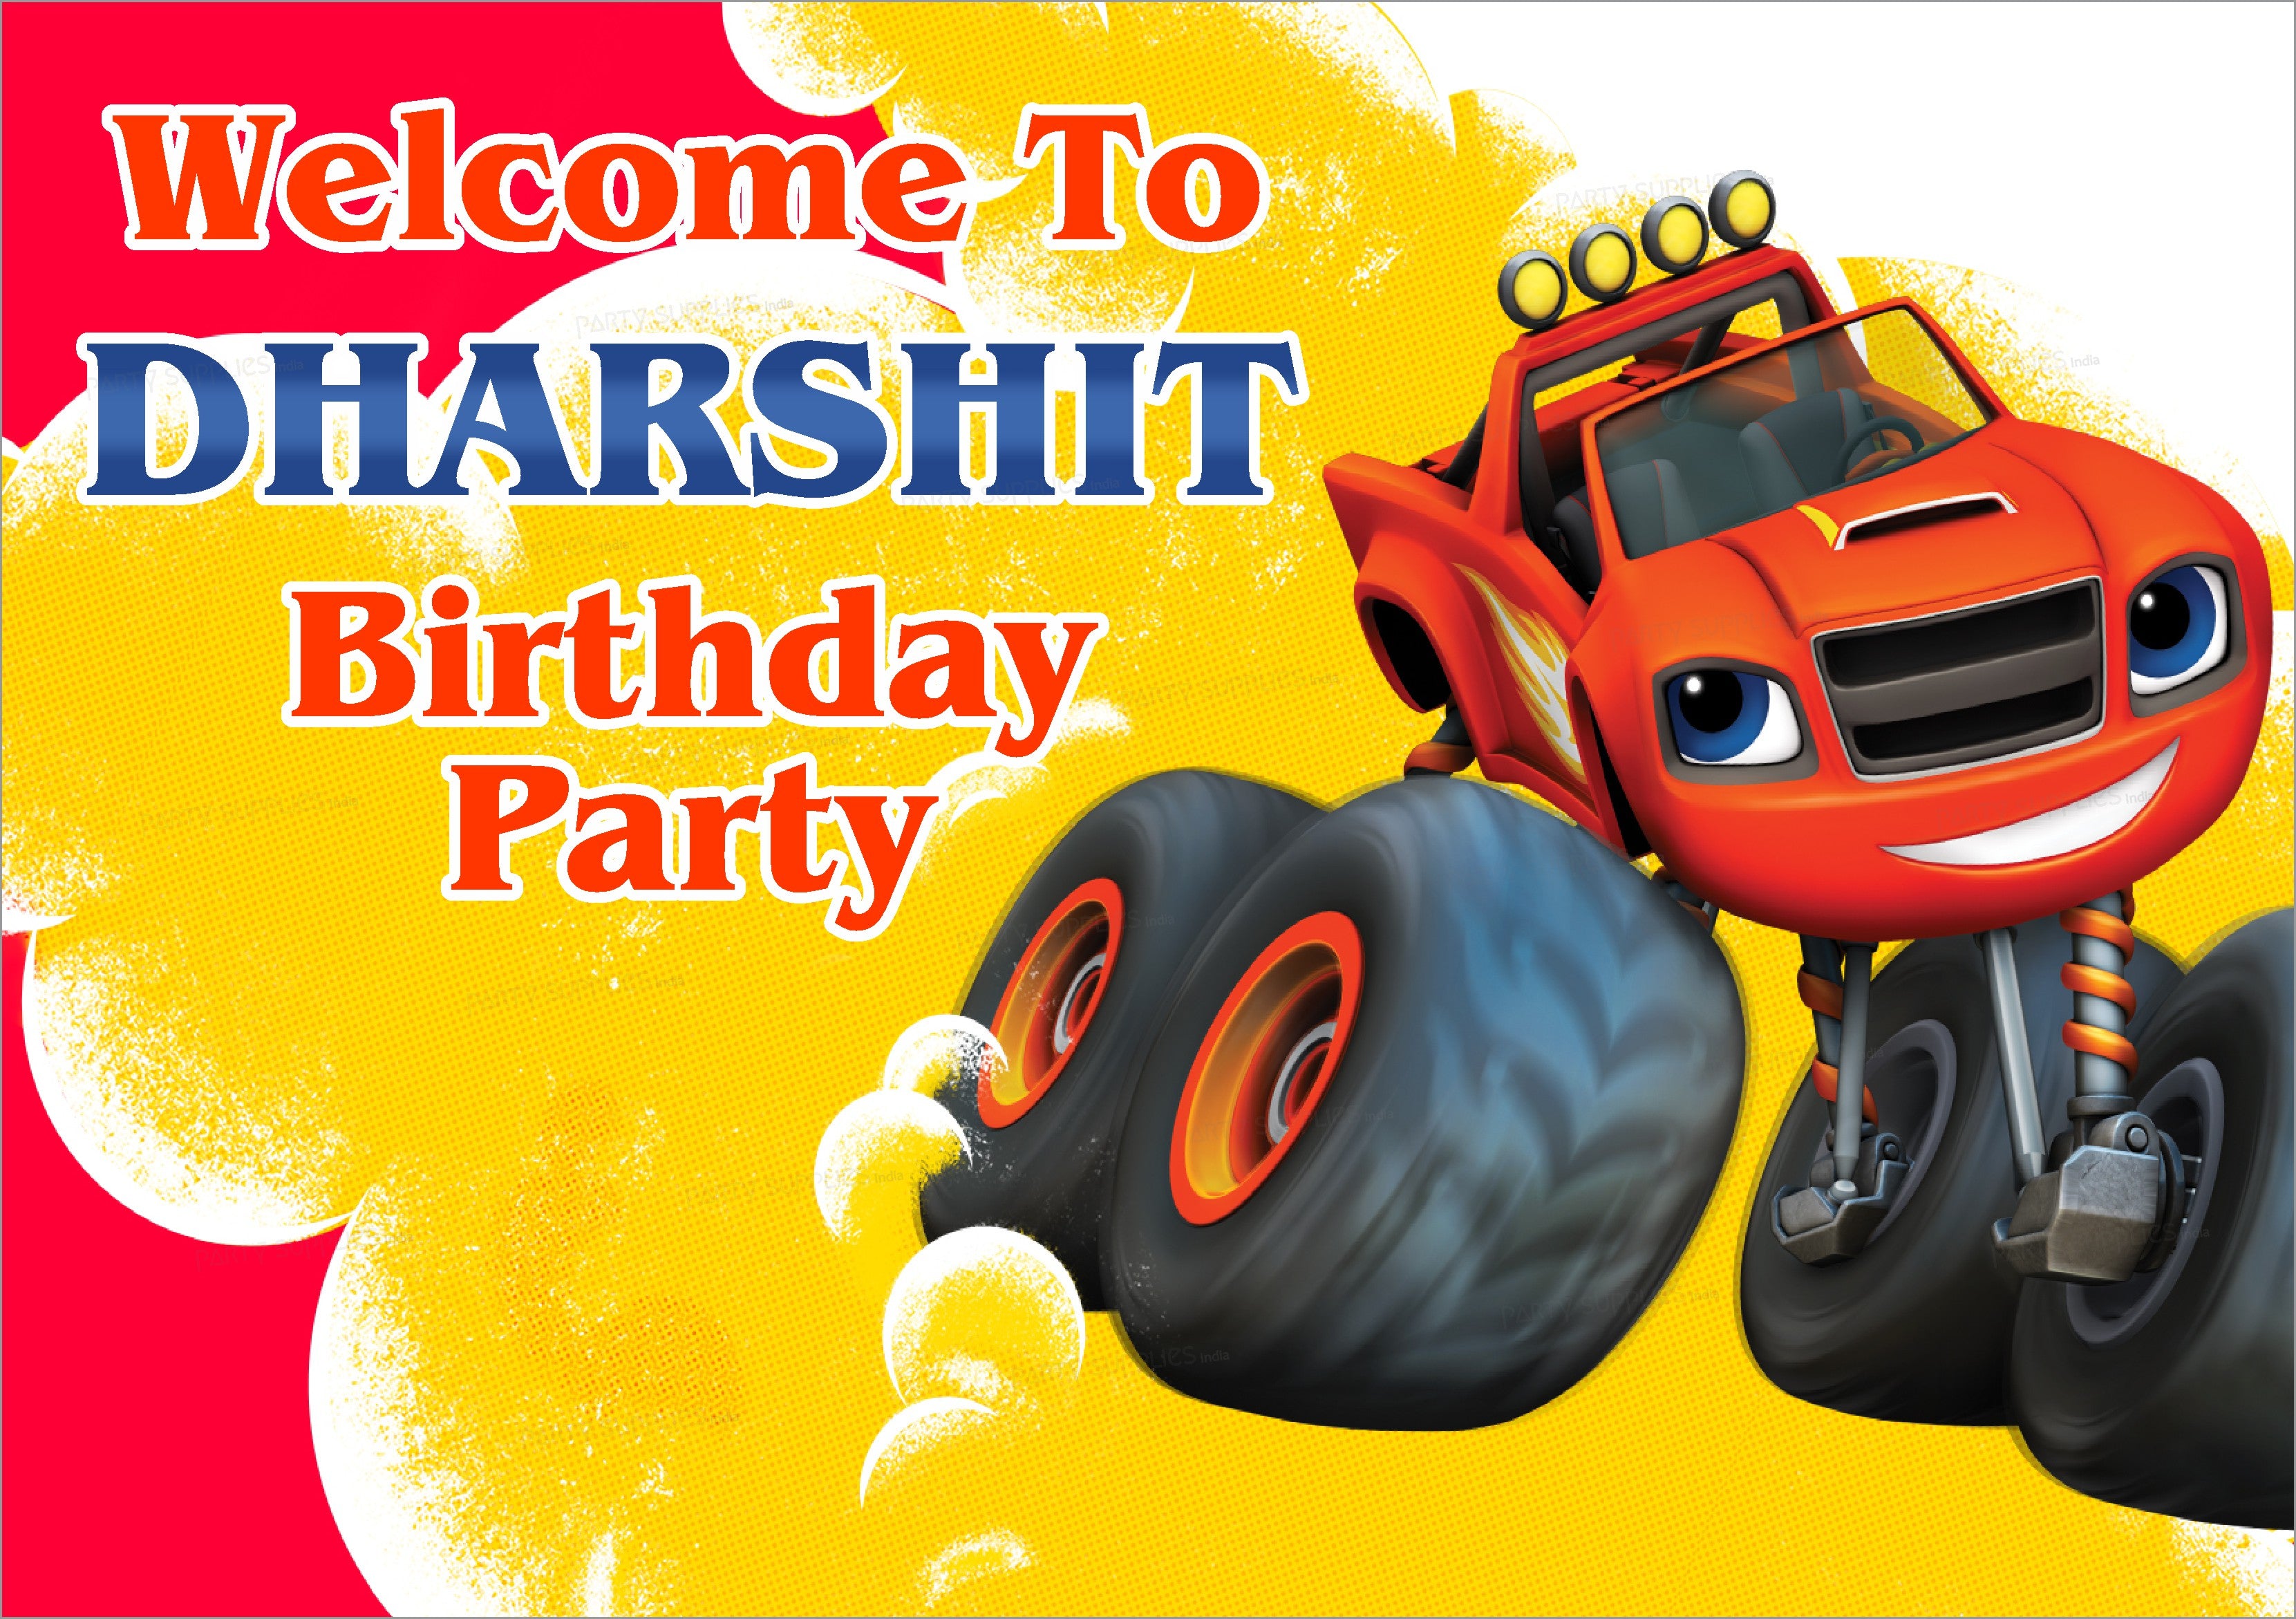 PSI Blaze and the Monster Machines Theme Customized Welcome Board